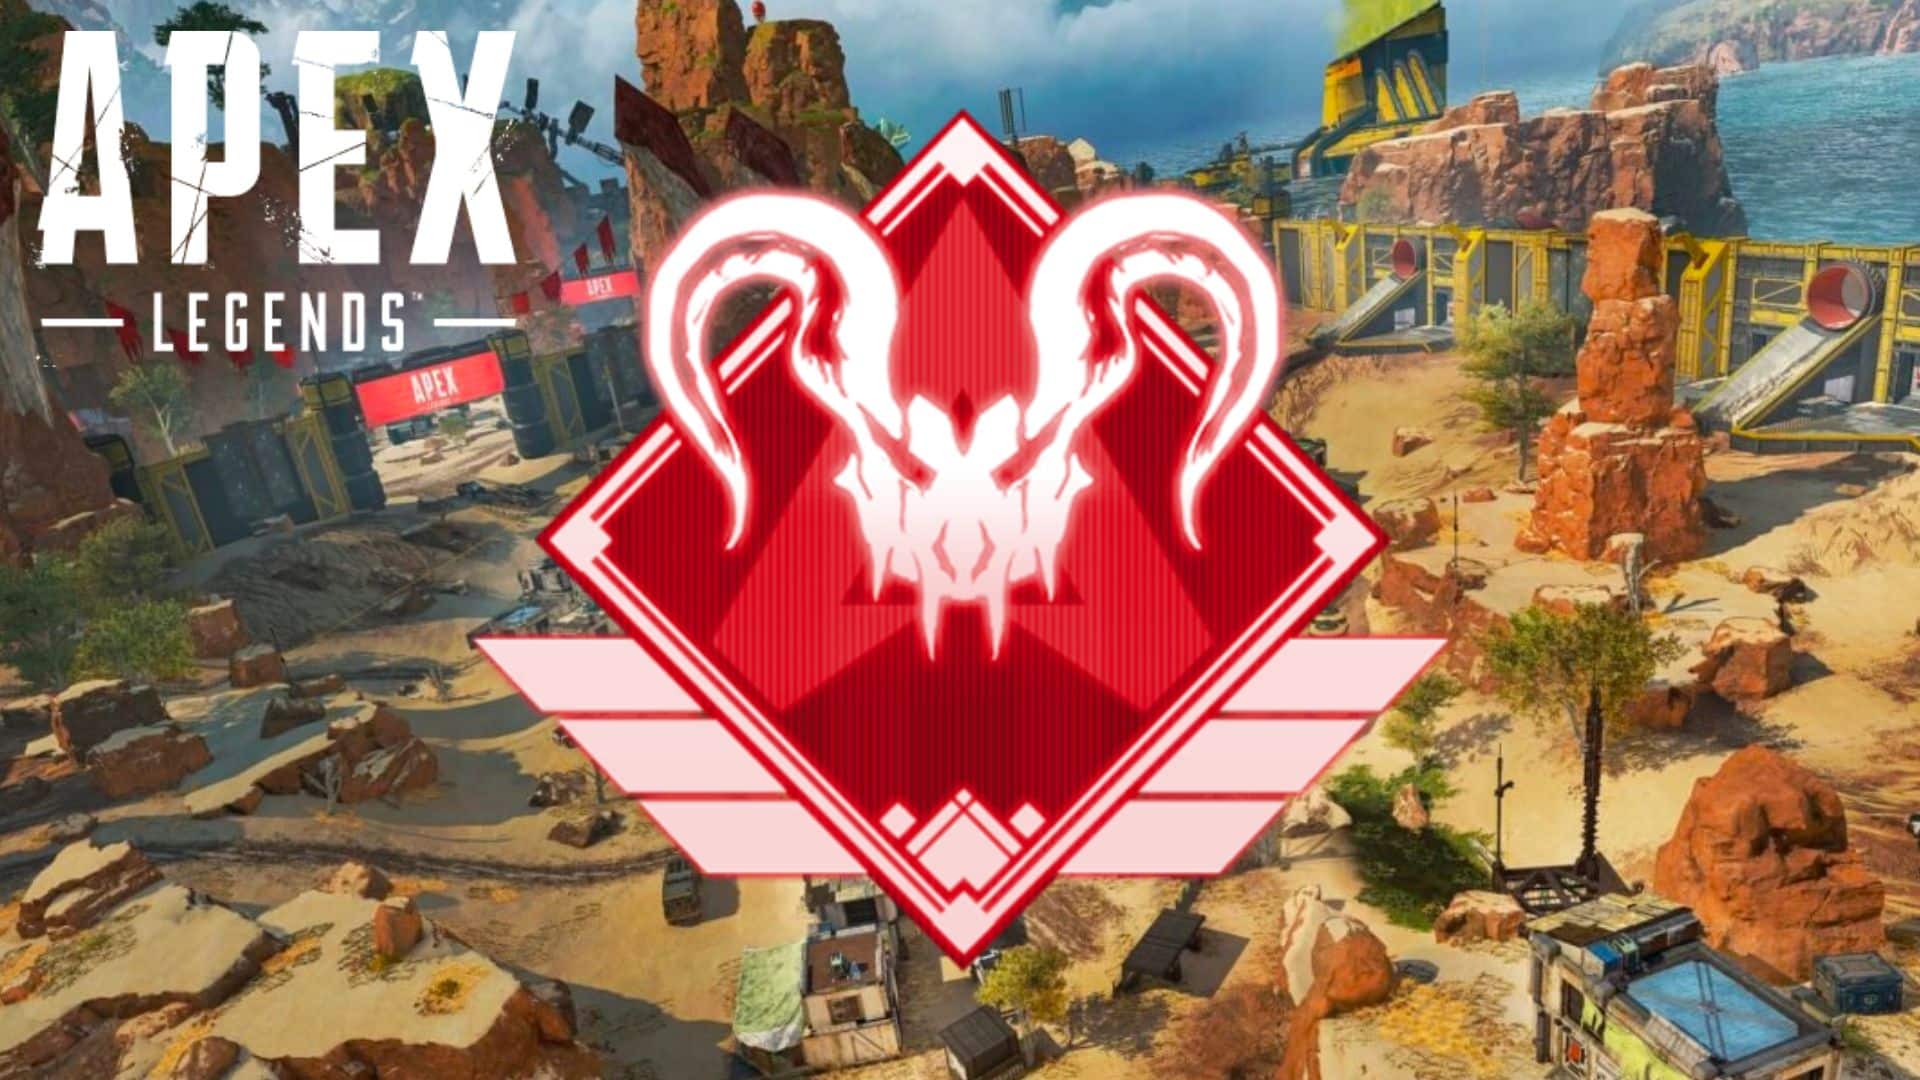 So I Played Apex Predator Ranked Games And - PS4 Apex Legends